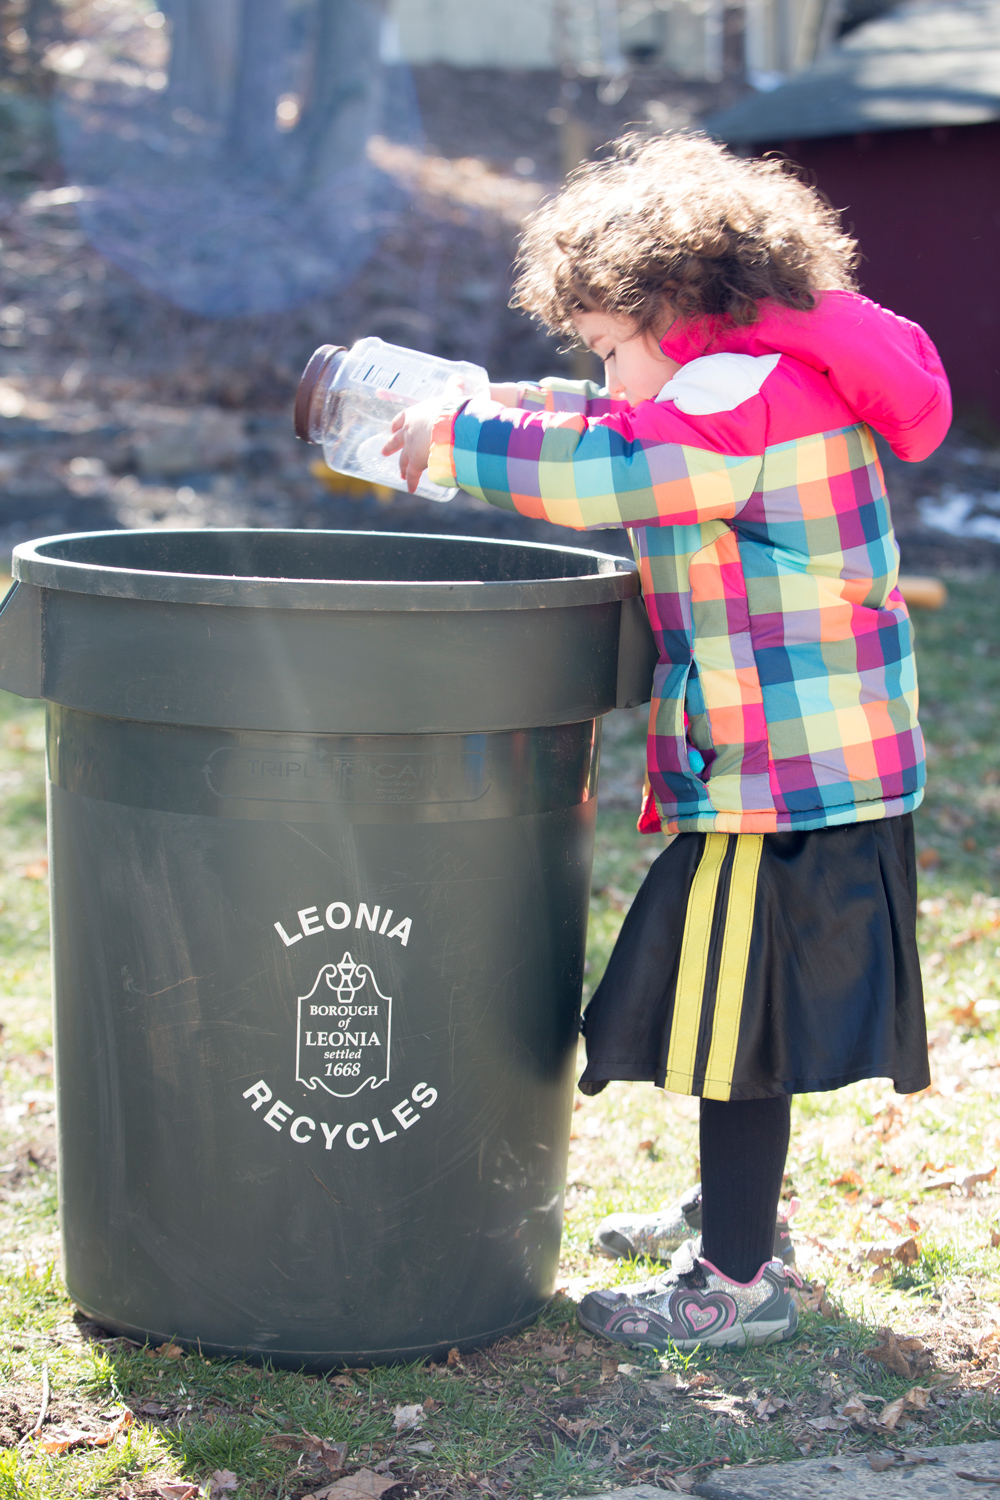 Recycling in Leonia